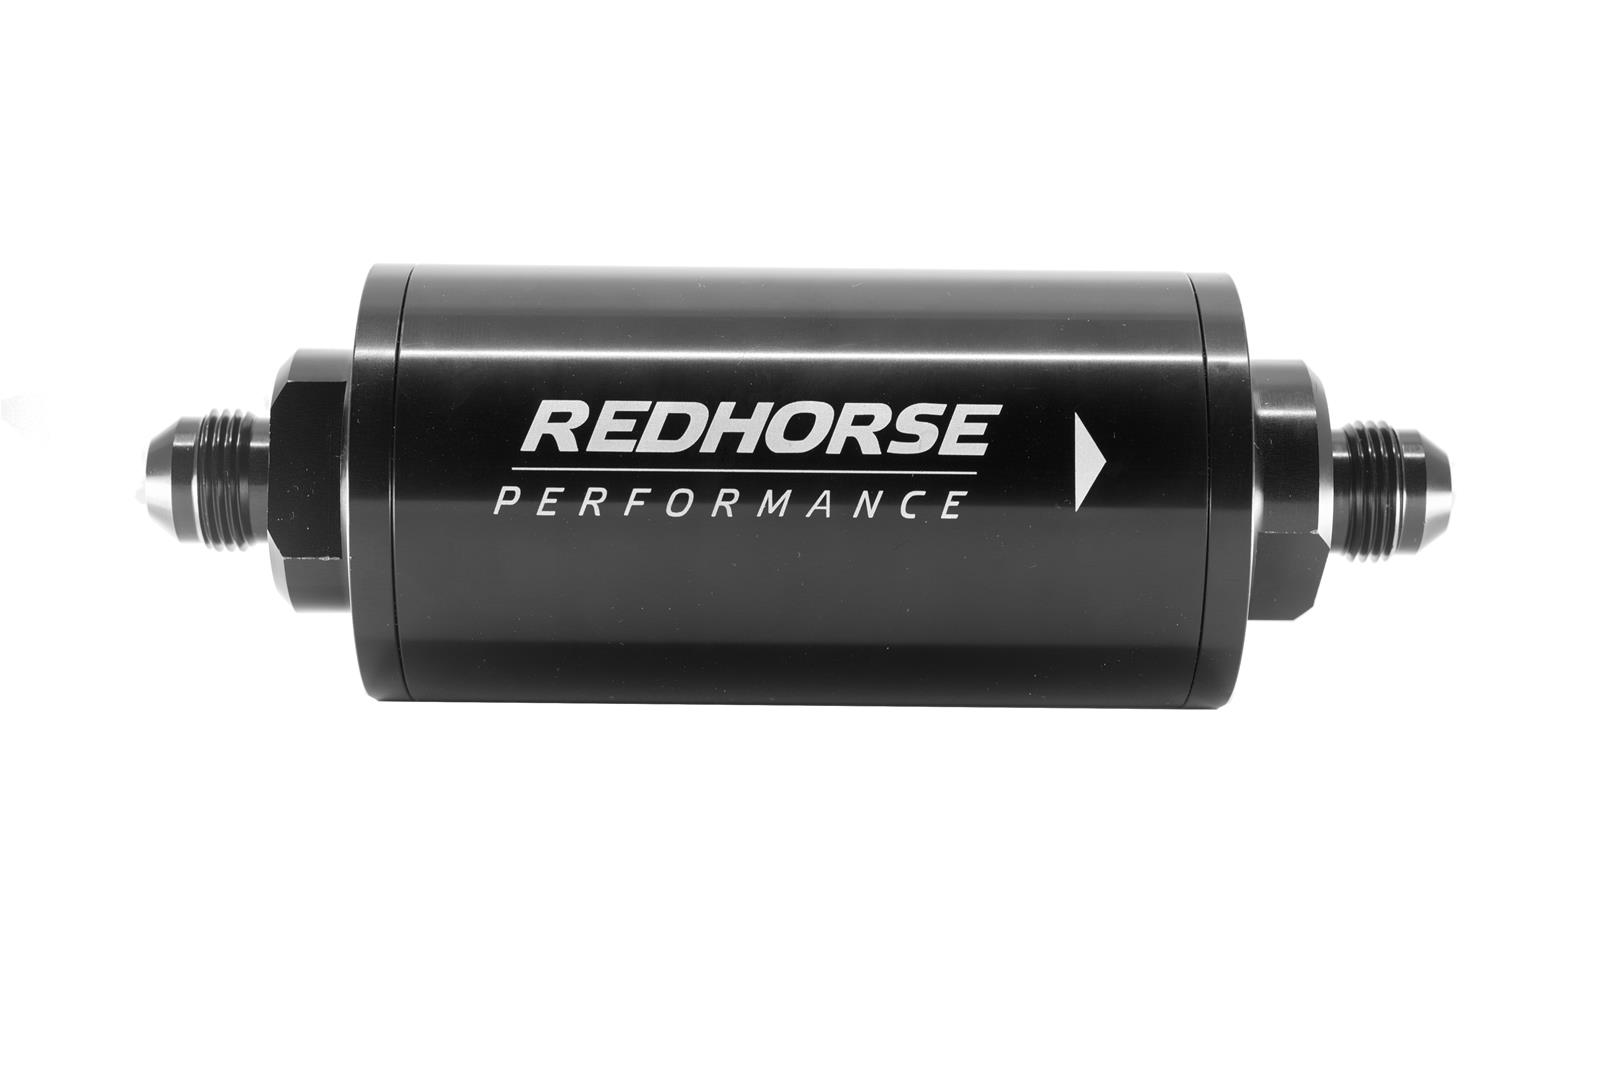 Redhorse Performance 4651-10-2-12 6in Cylindrical In-Line Race Fuel Filter w/ 12 Micron Fiberglass element - 10 AN